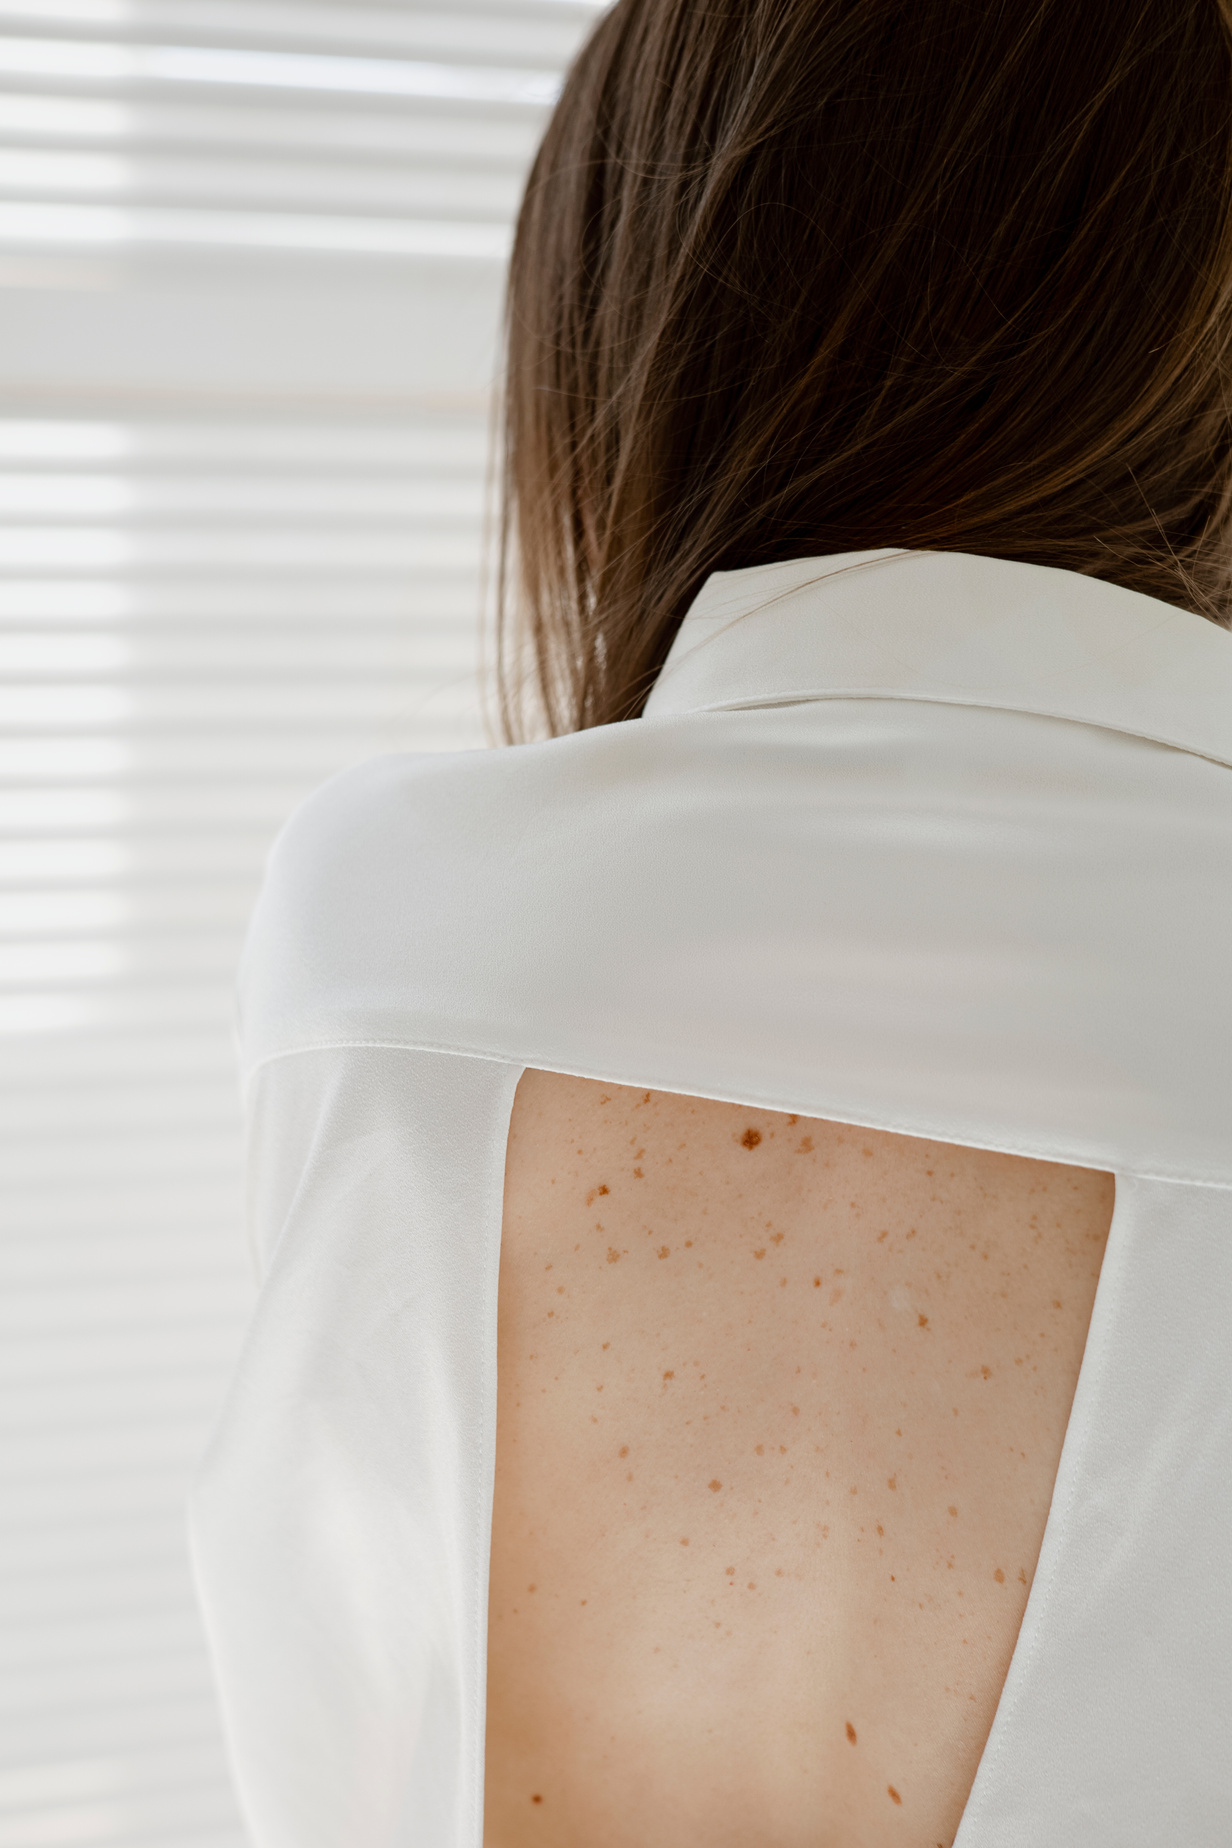 A Woman with Freckles on Her Back